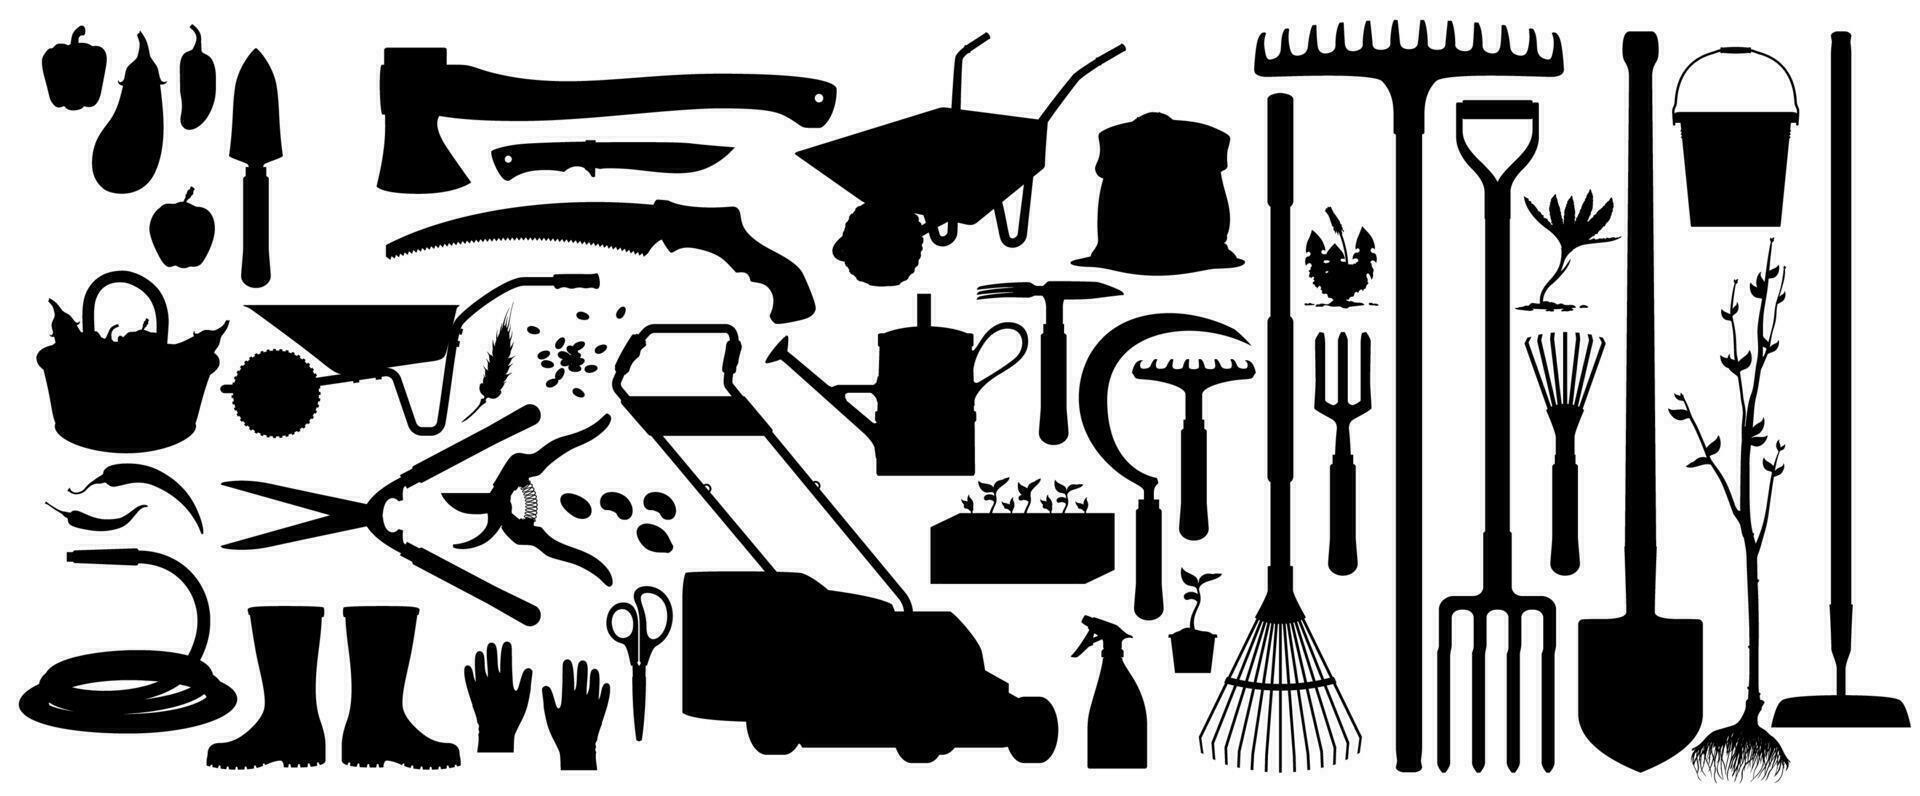 Gardening and farming tools silhouette icons vector